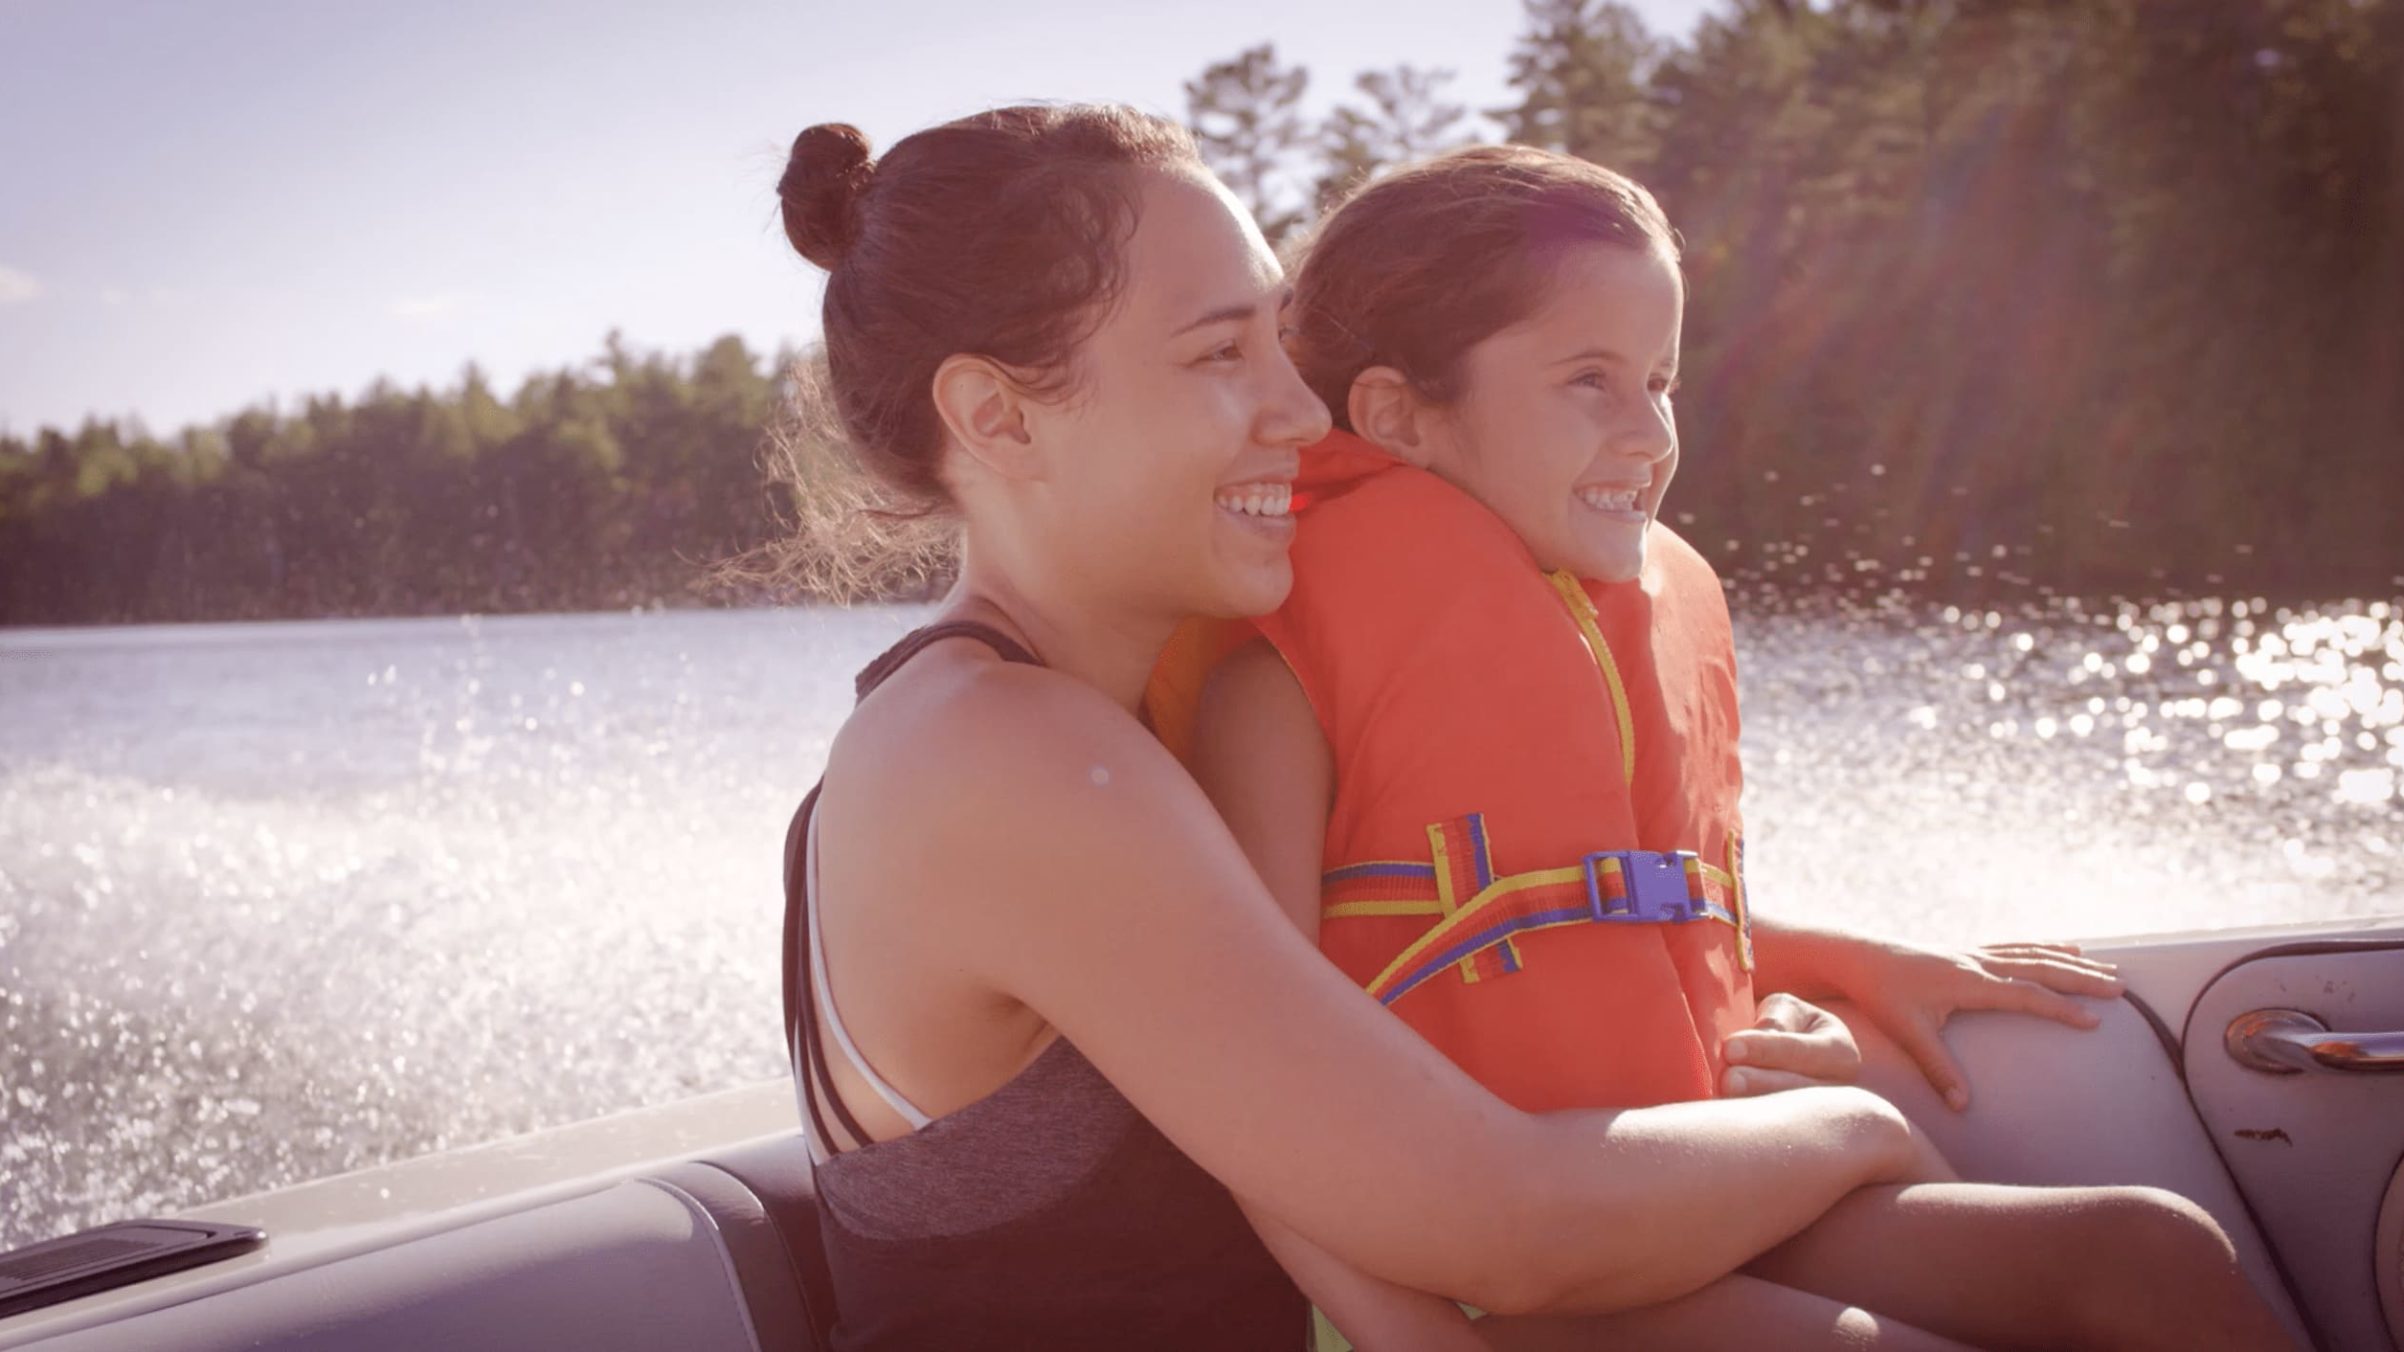 Mom and daughter on a boat ride